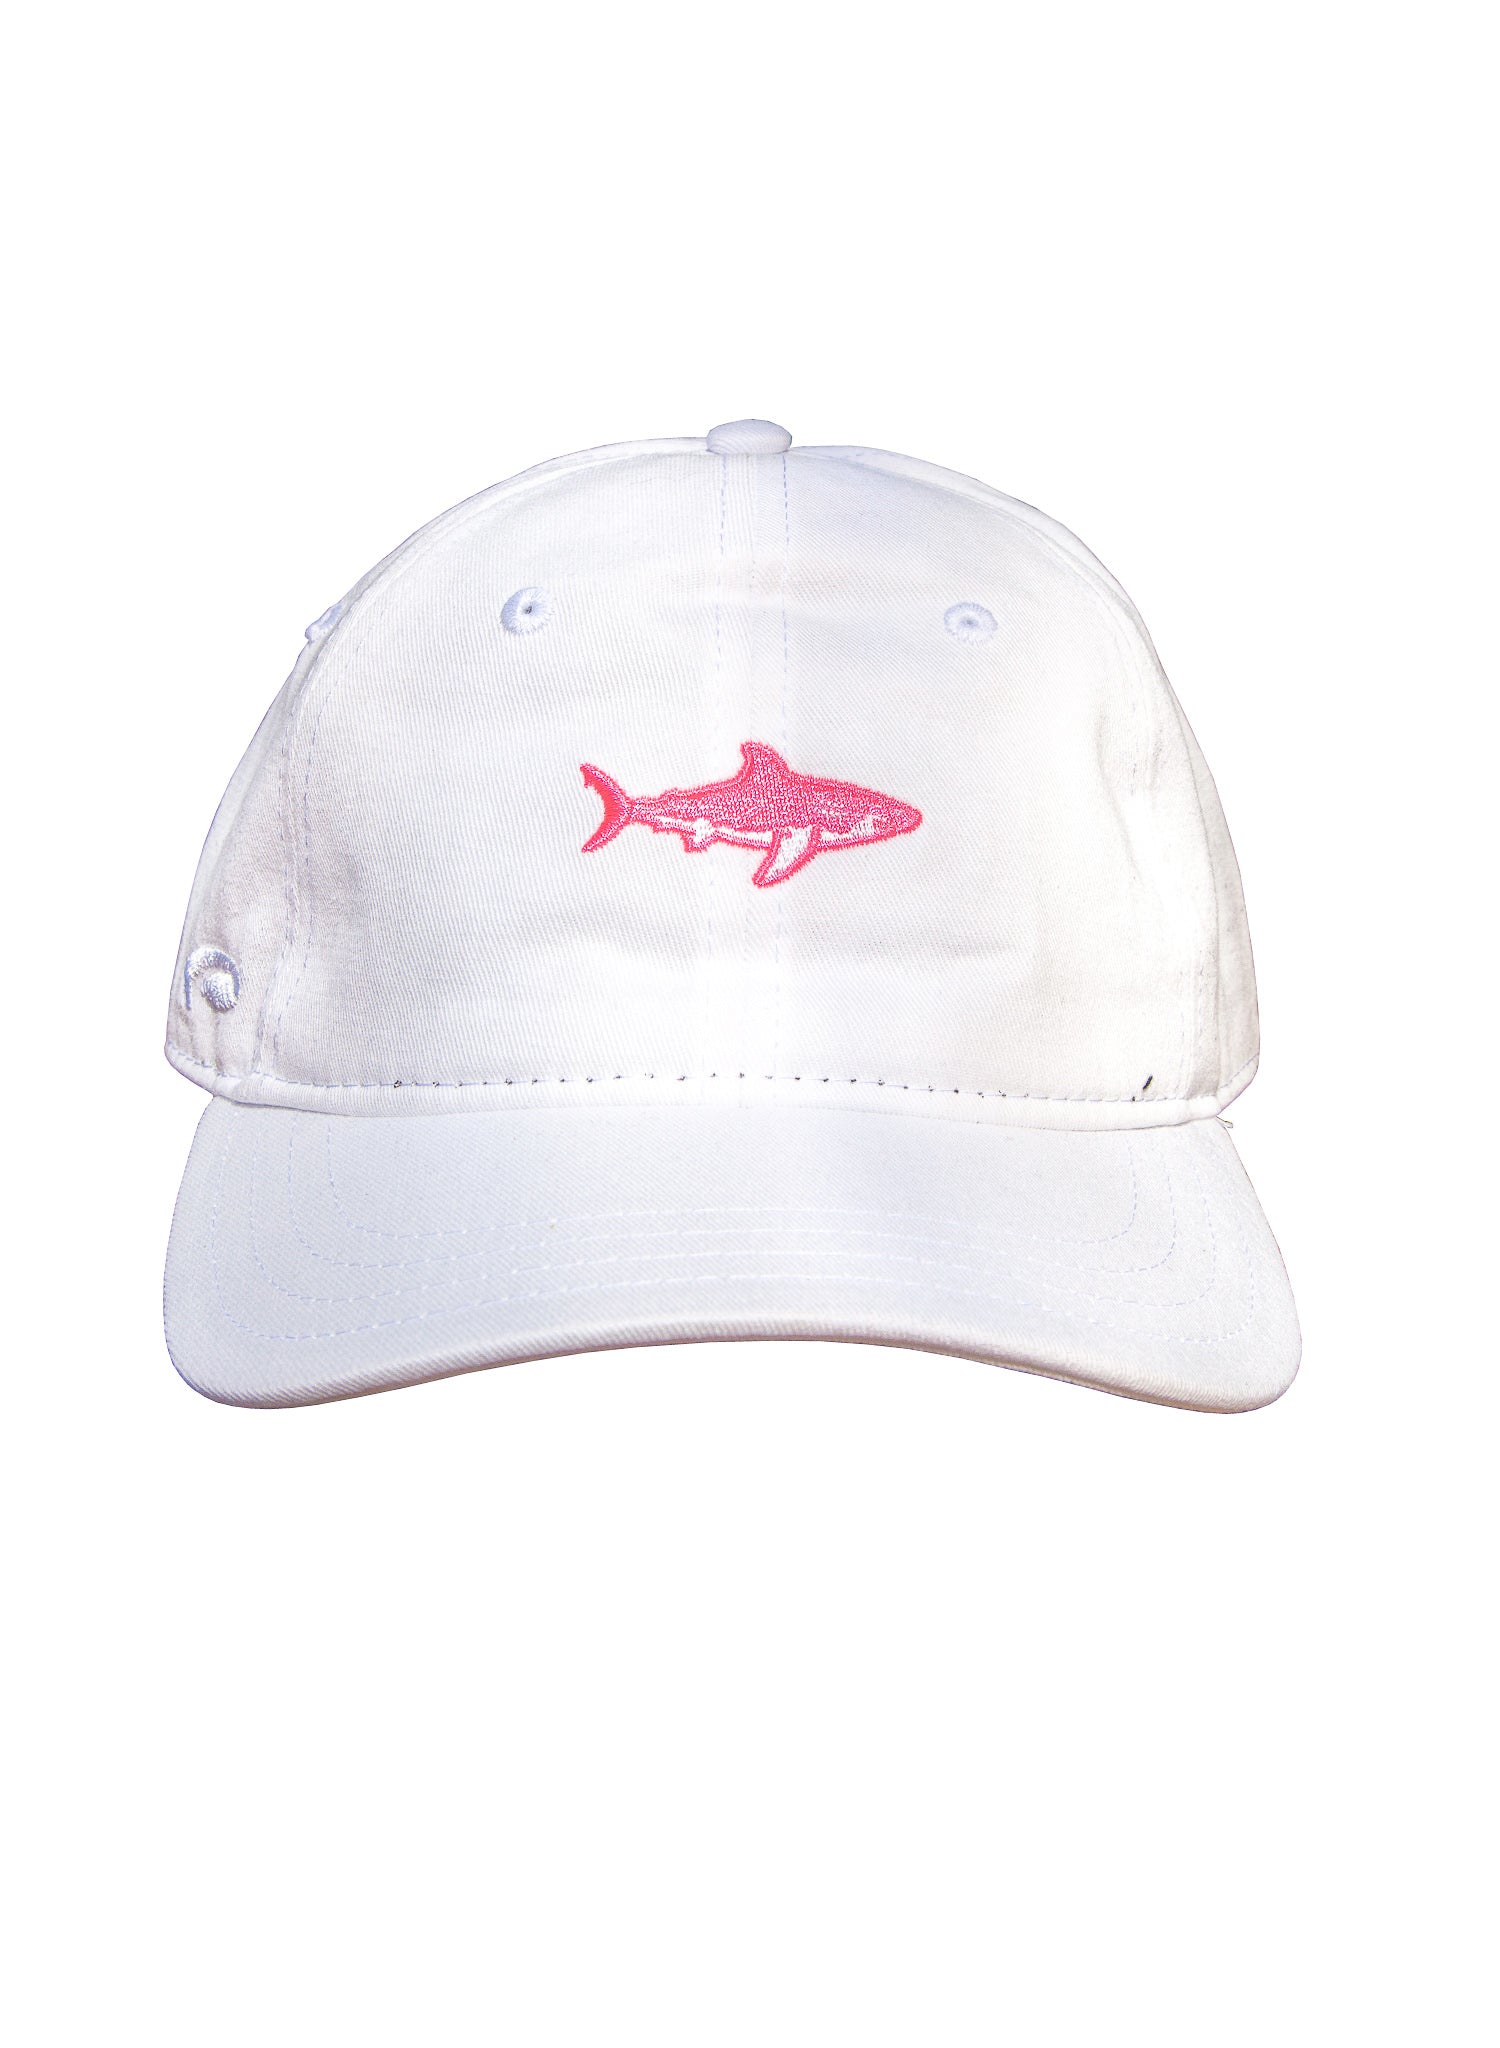 Island Water Sports Low Profile Shark Hat White/Pink OS